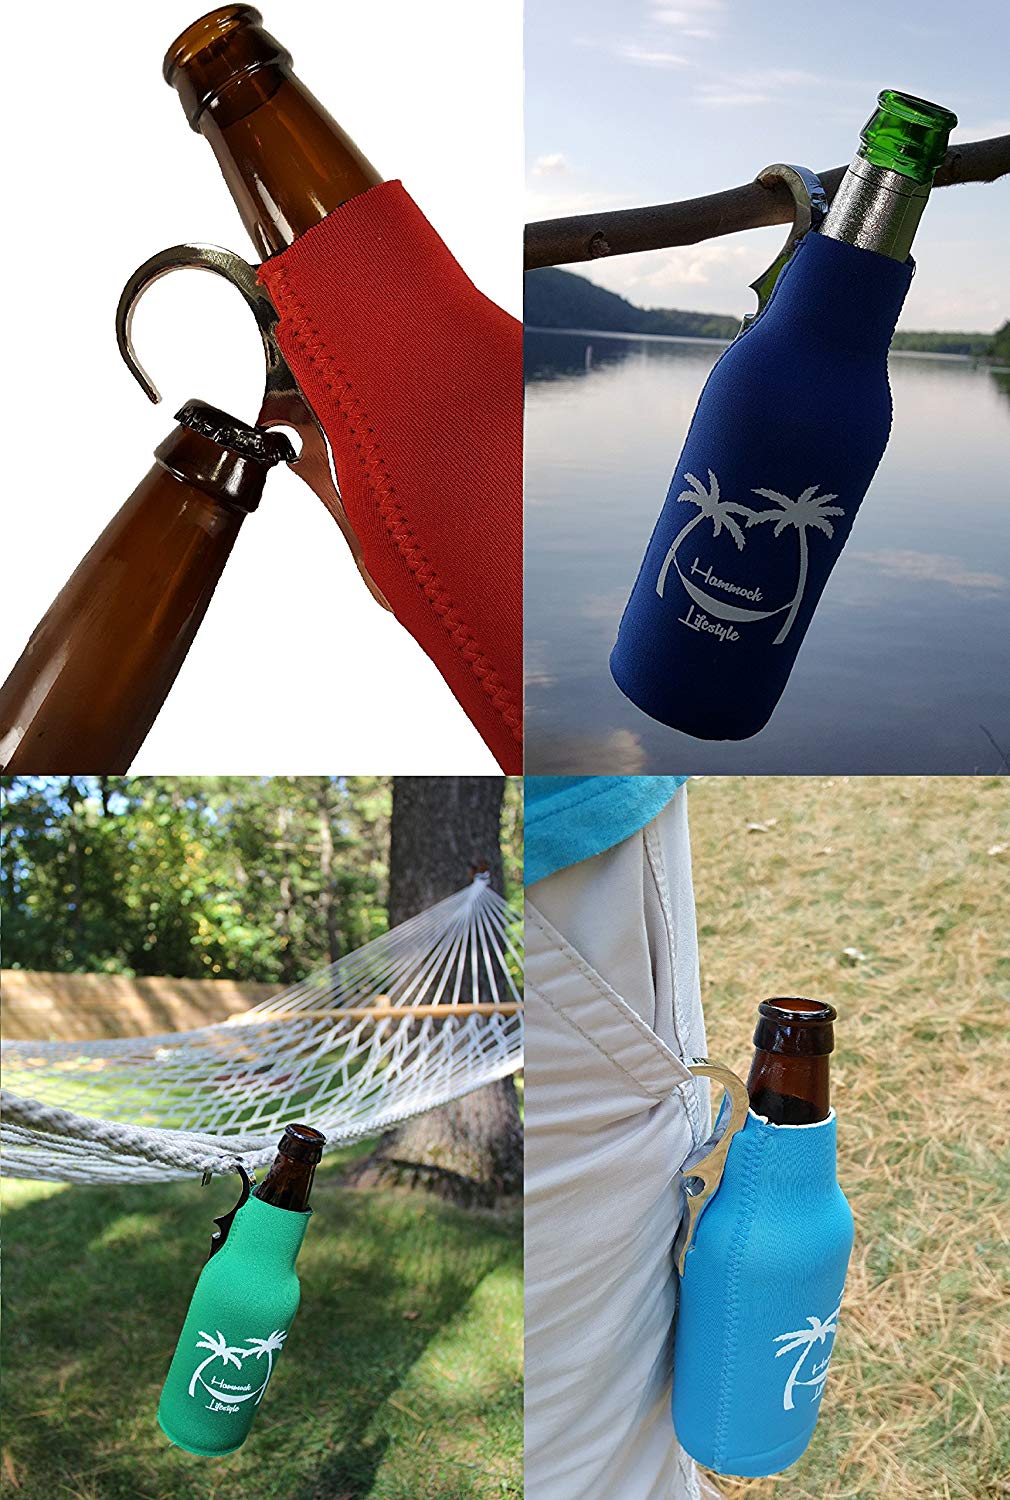 CoozieClaw Unique Bottle Cooler with Built in Hook and Bottle Opener Fun Gift #1 Hanging Bottle Holder Easily Hang Your Cold Beer Bottle Sleeve Anywhere (1, Blue With Logo)